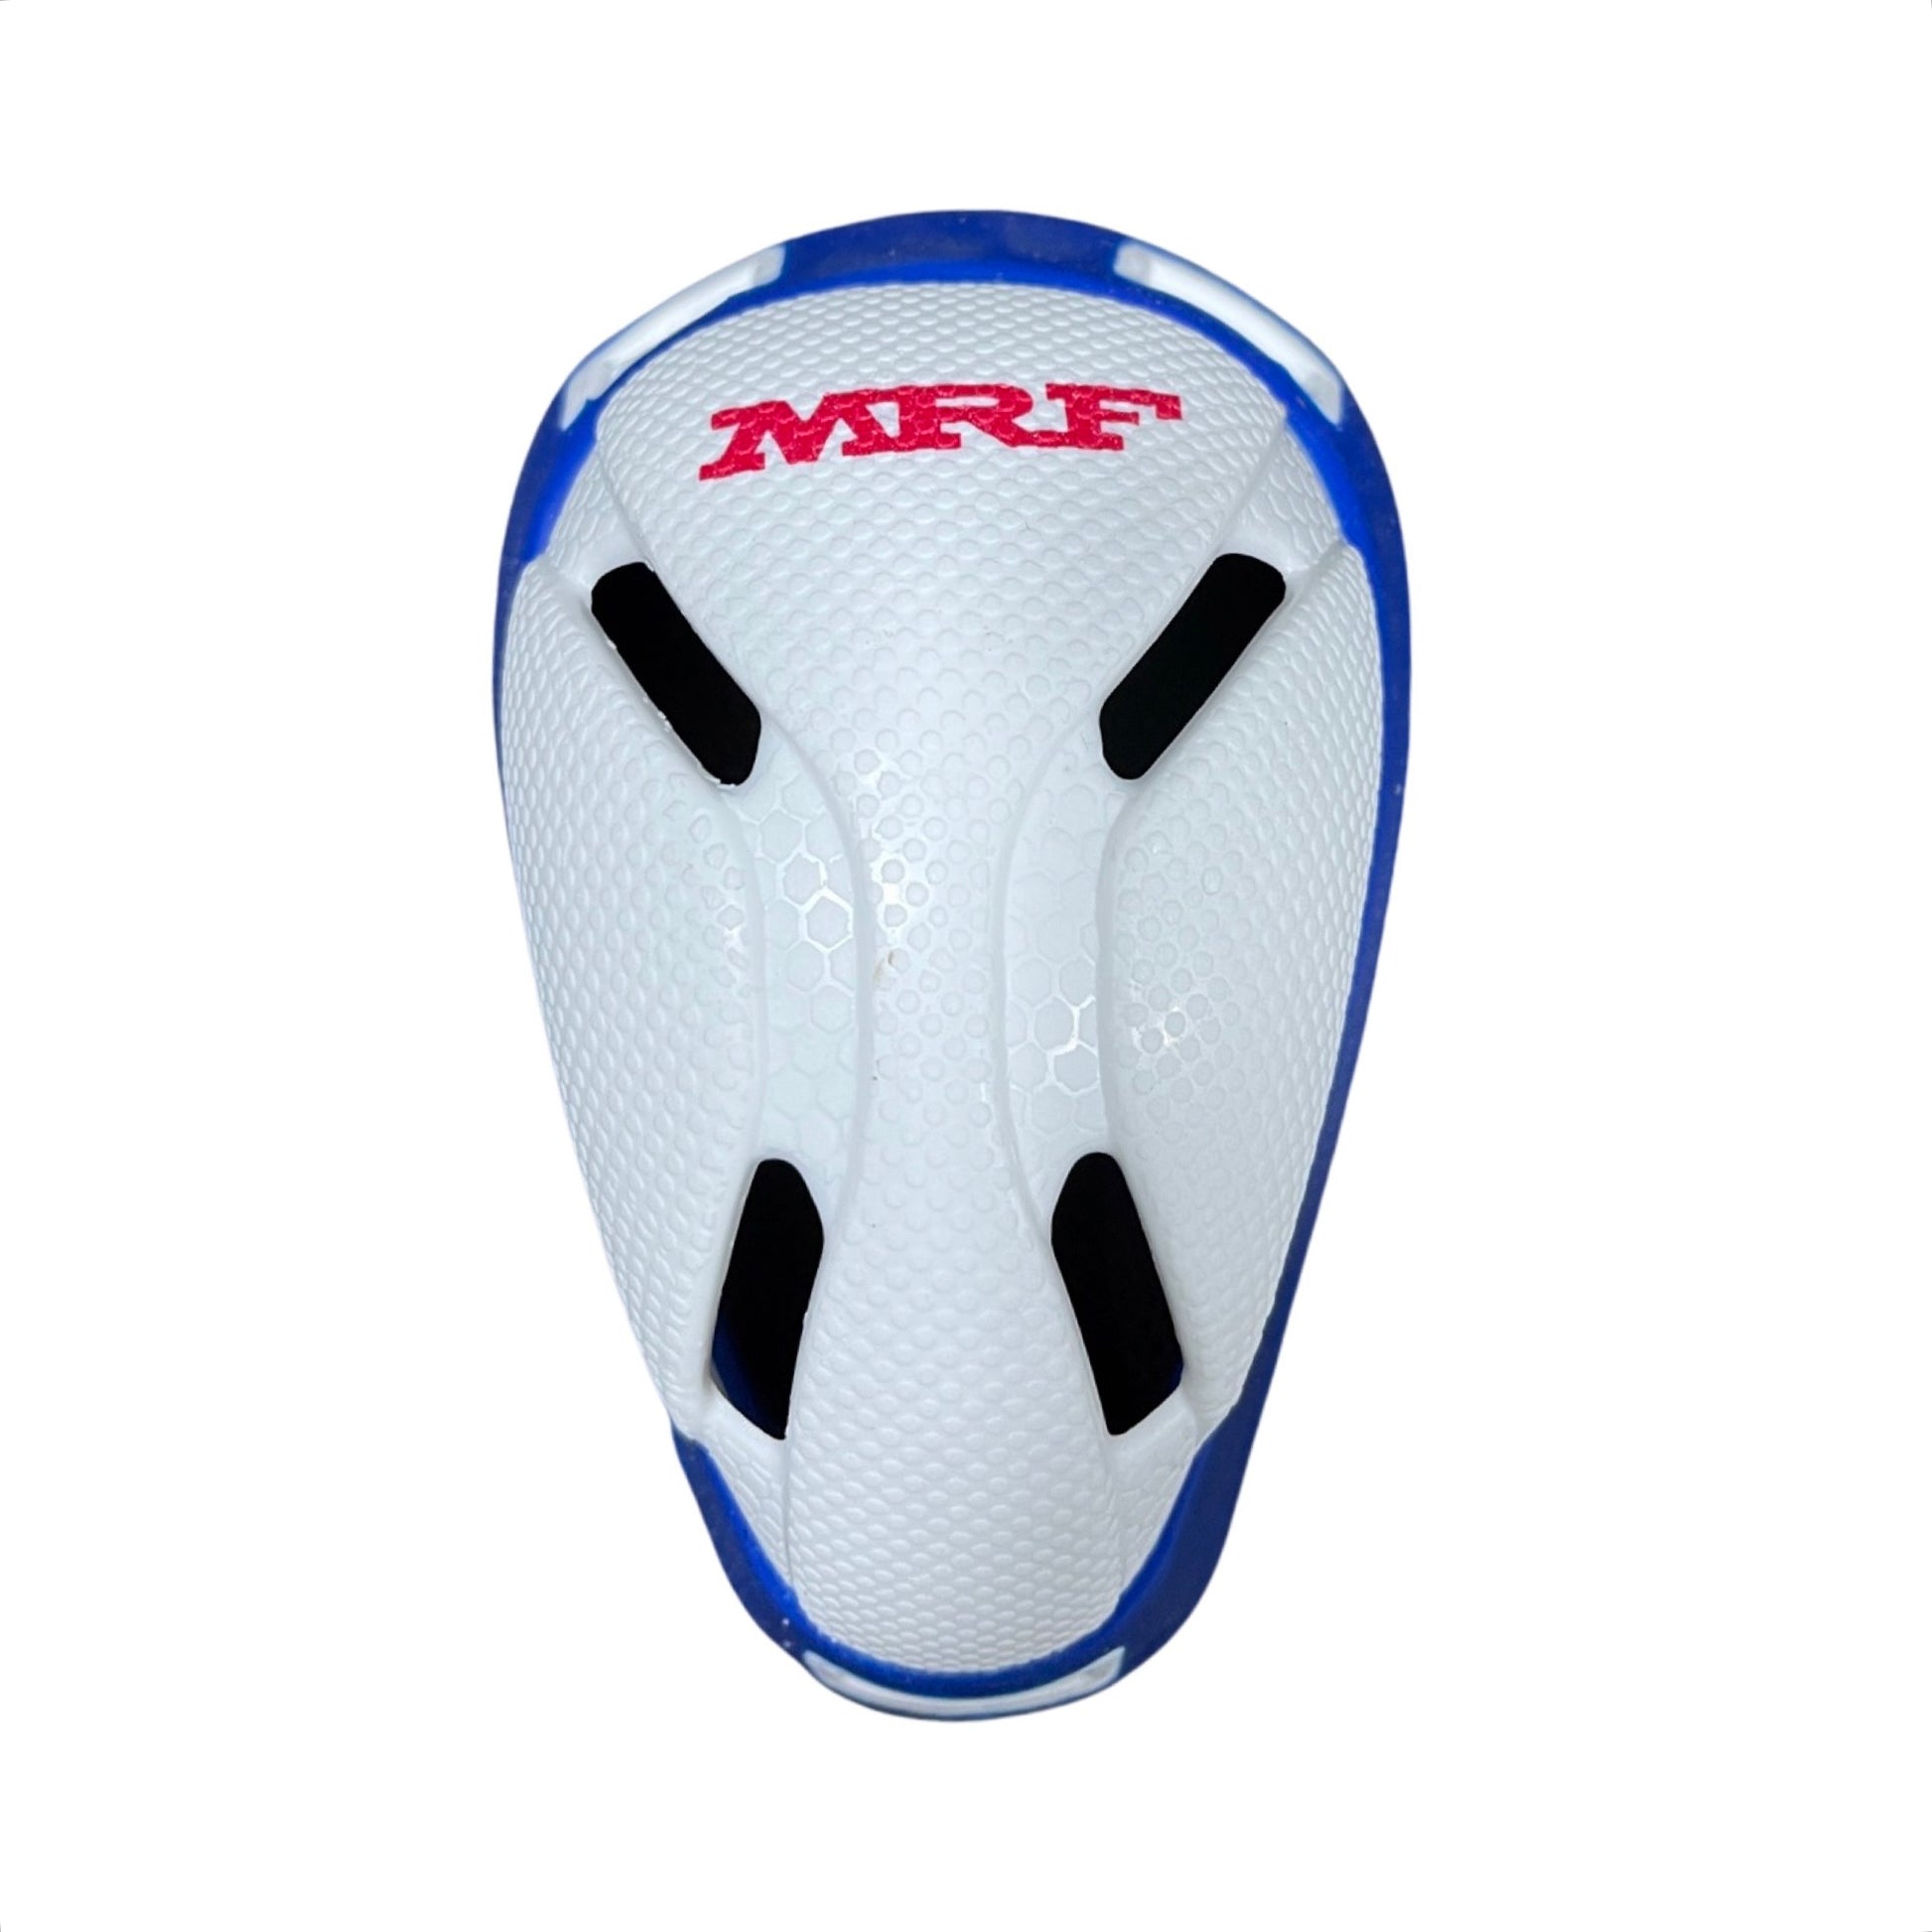 MRF Abdomen Guard Protective Gear for Cricket & Other Sports